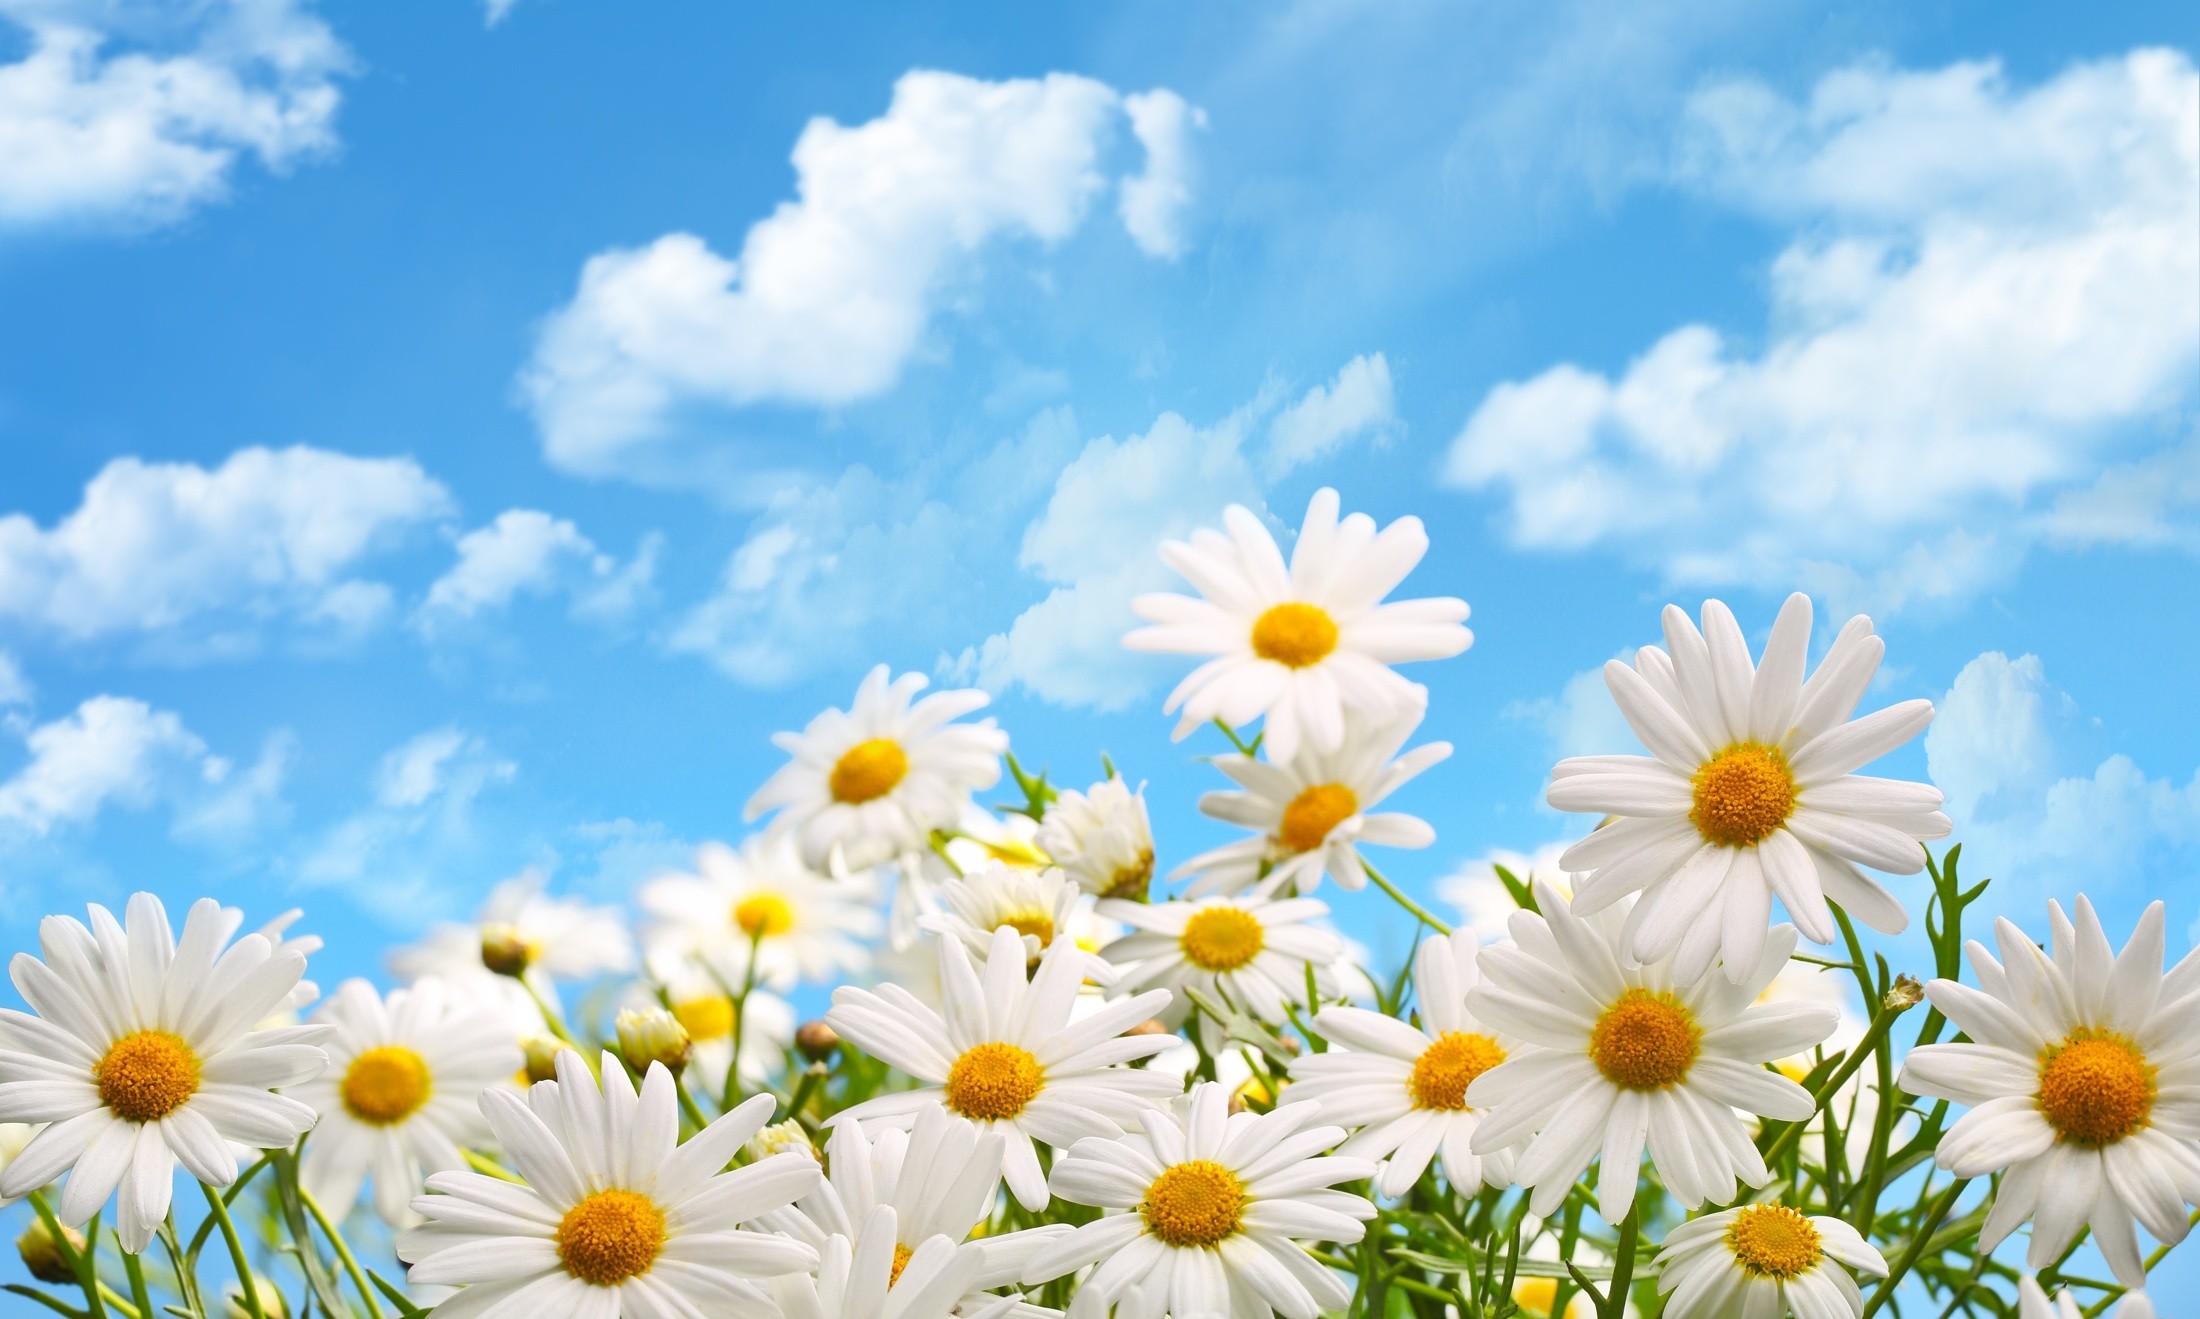 General 2200x1319 plants flowers clouds white flowers nature